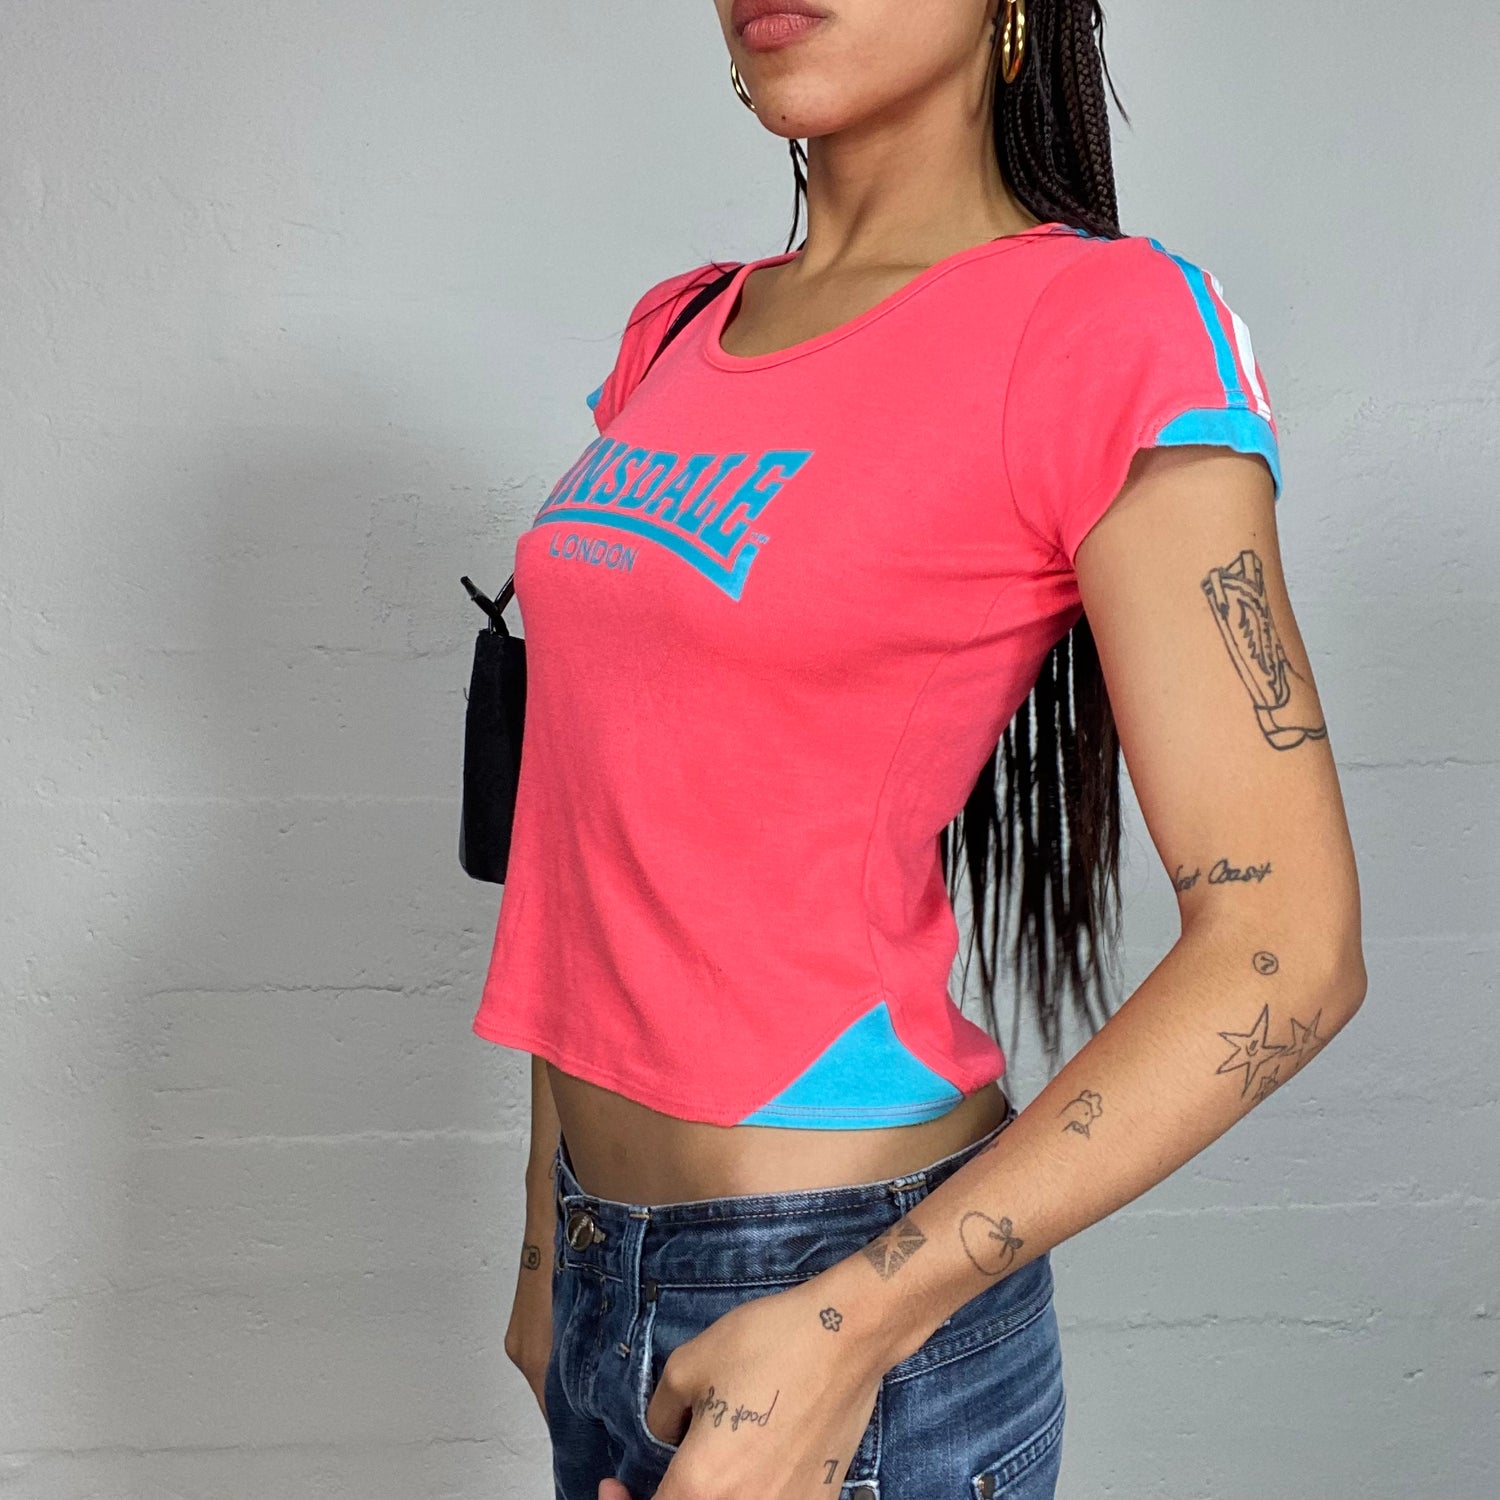 Vintage 2000's Lonsdale Sporty Salmon Pink Top with Blue Brand